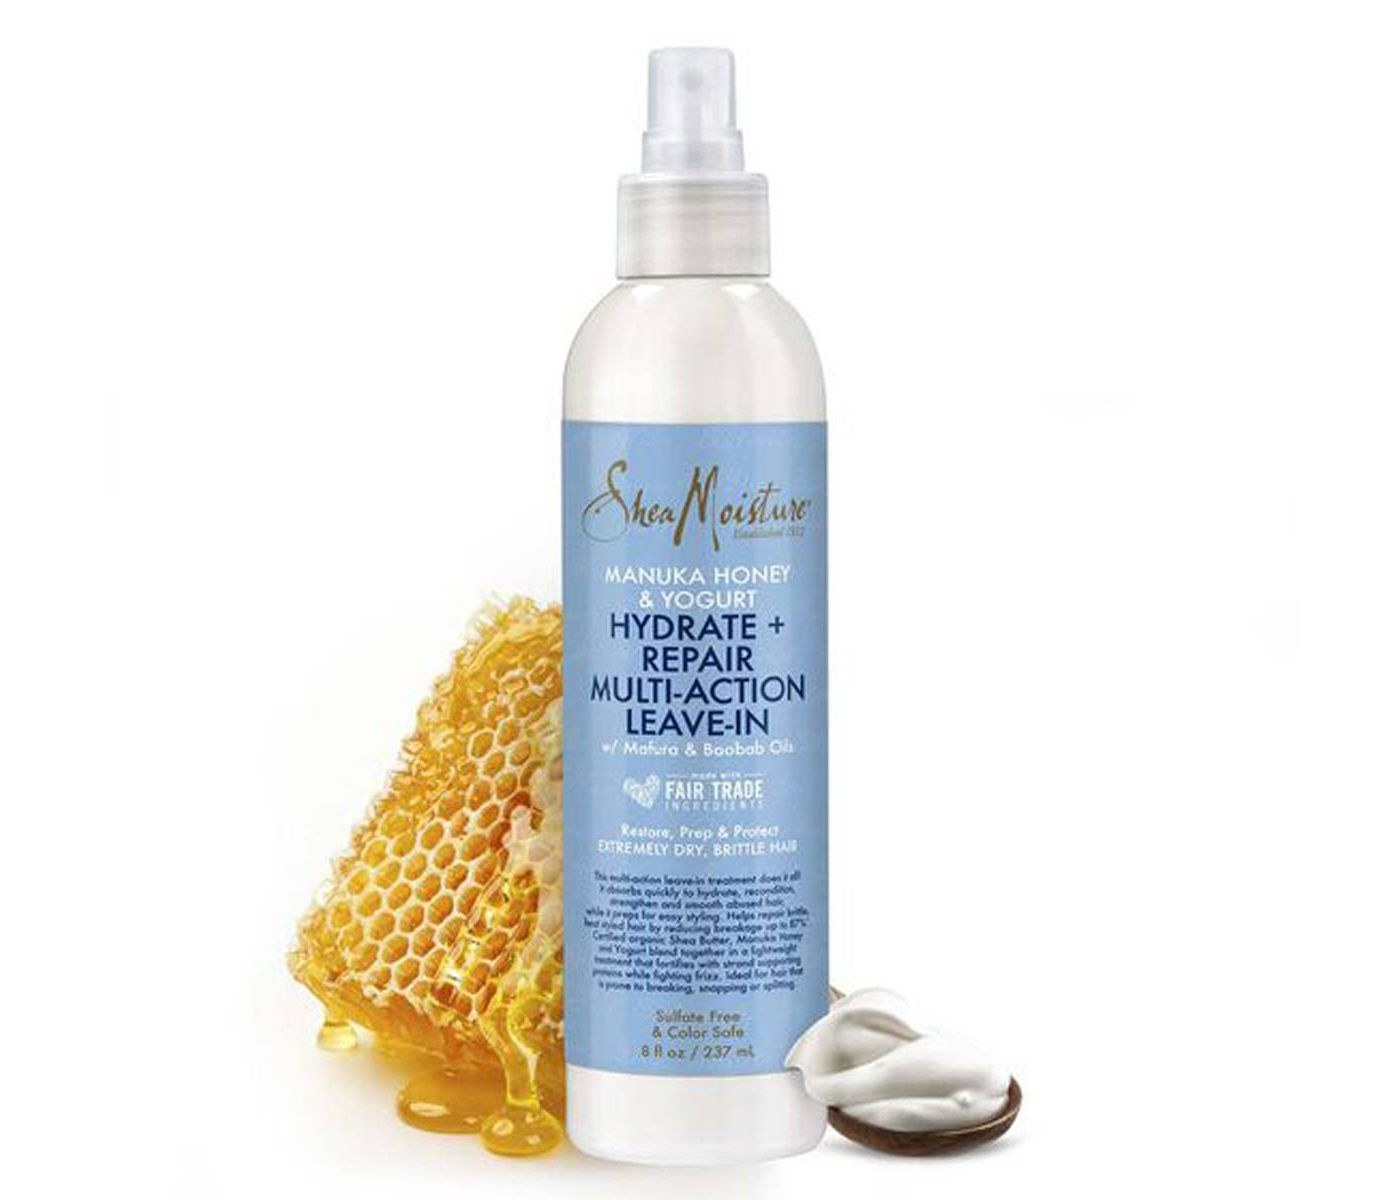 The SheaMoisture repair multi-action leave-in conditioner spray